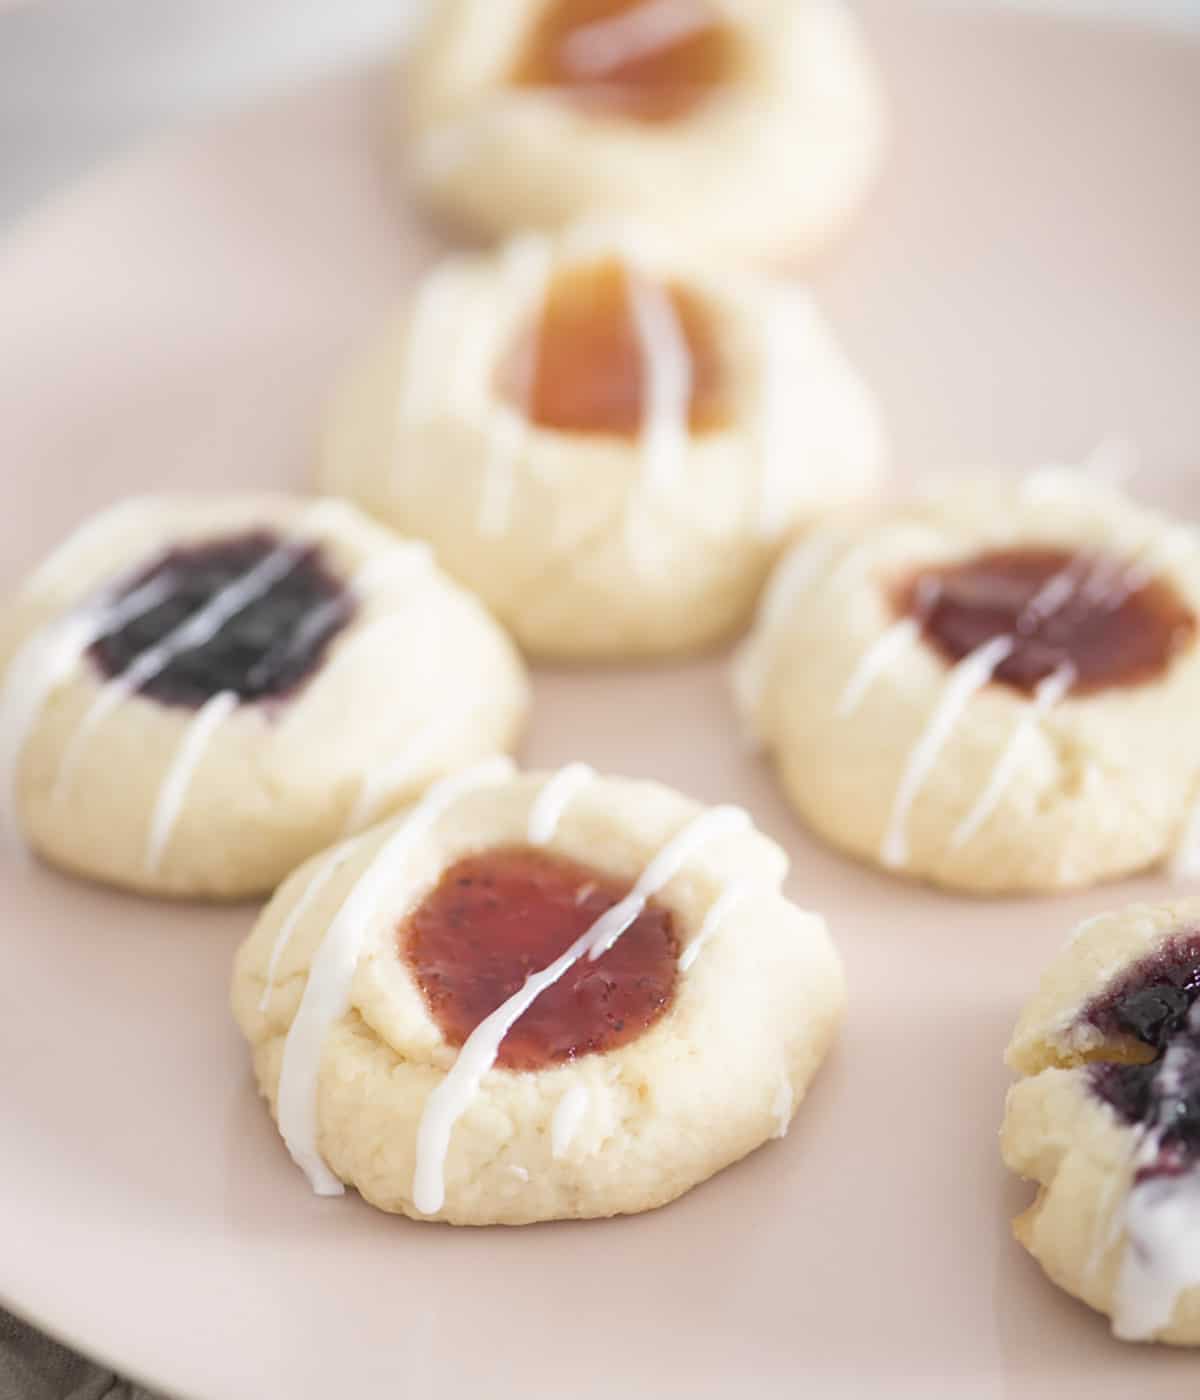 Thumbprint cookies on a soft pink plate.